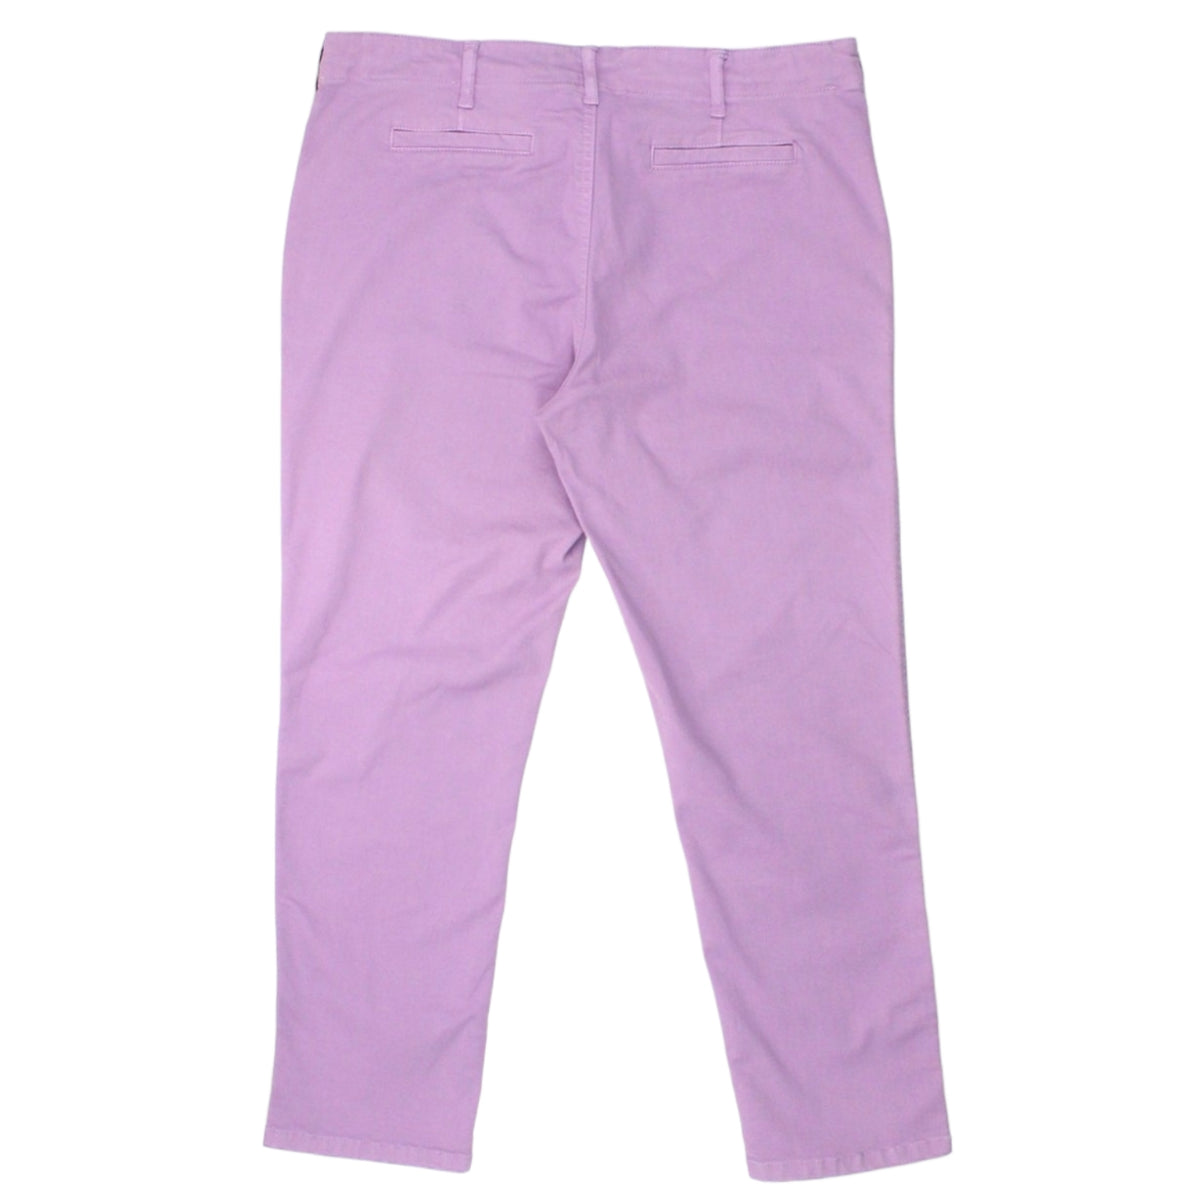 NRBY Lilac Canvas Chinos - Sample